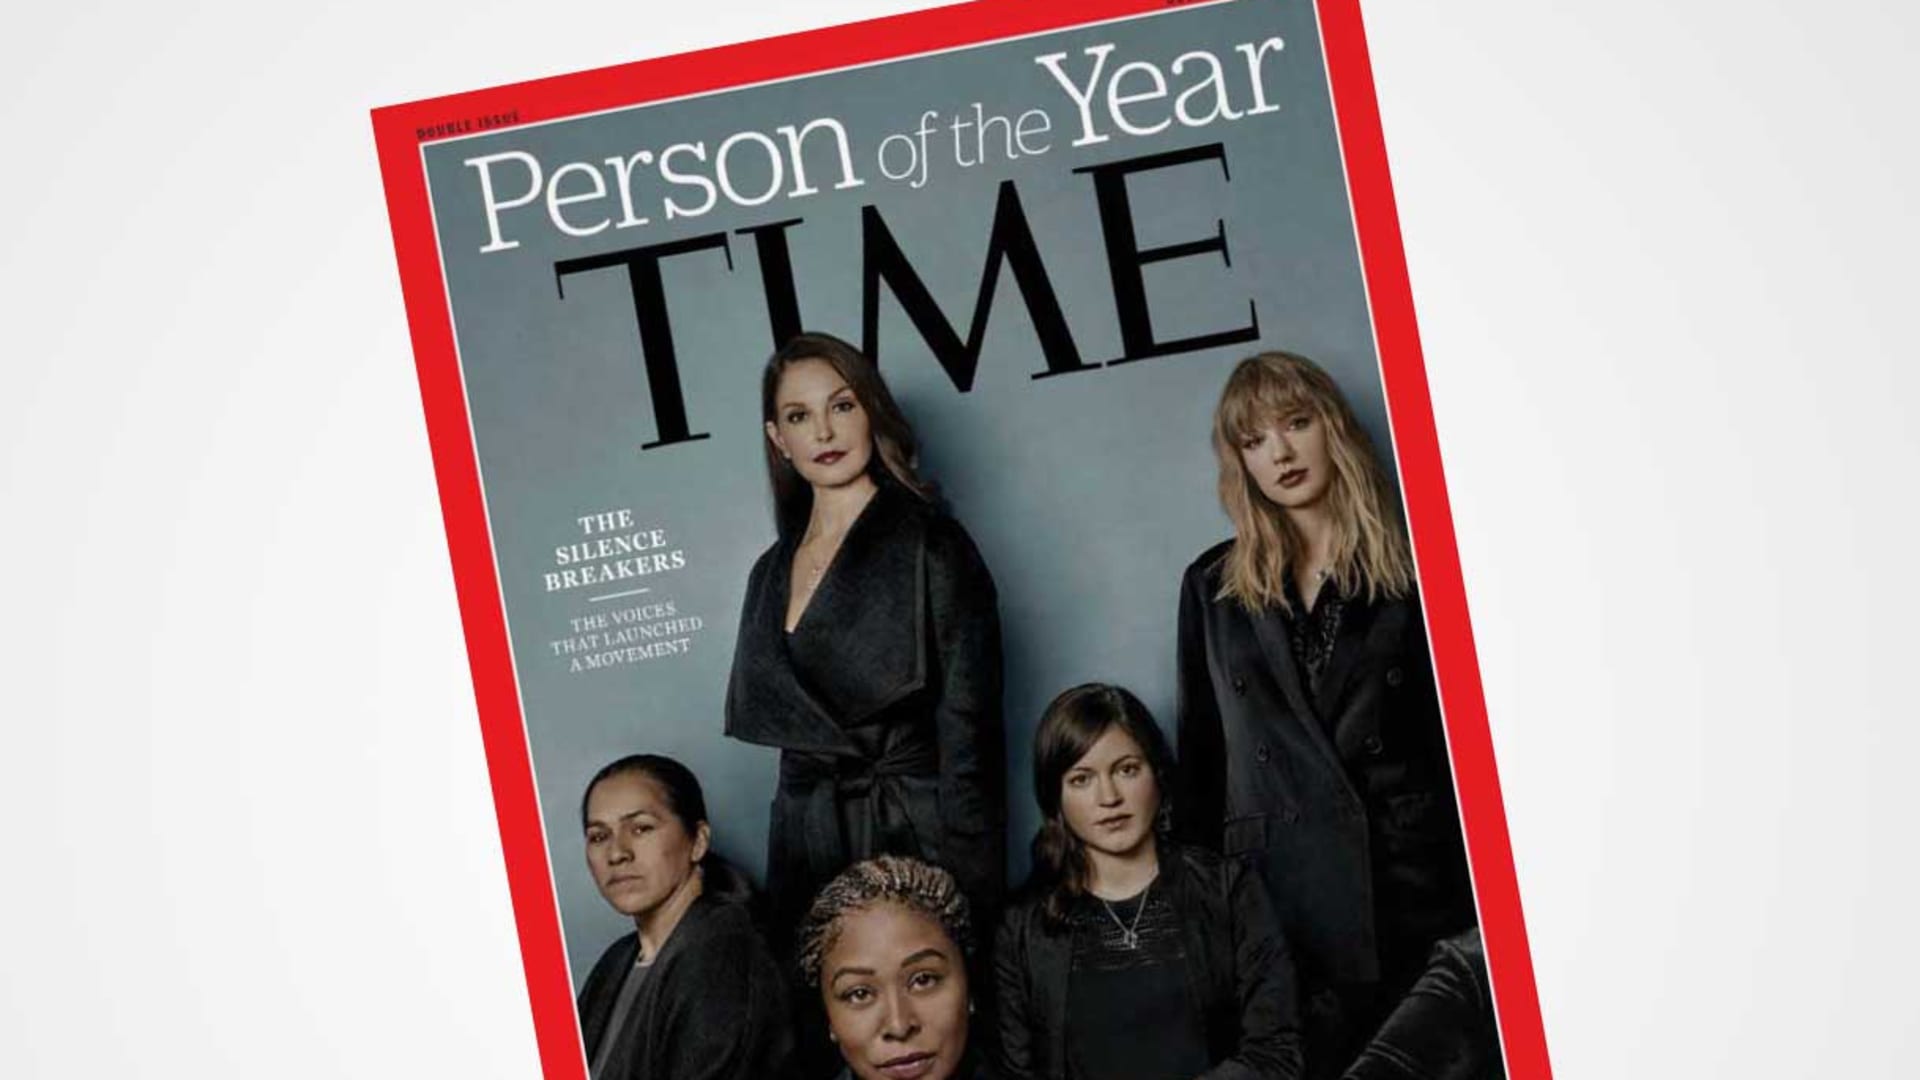 Time magazine's Person of the Year is 'The Silence Breakers'